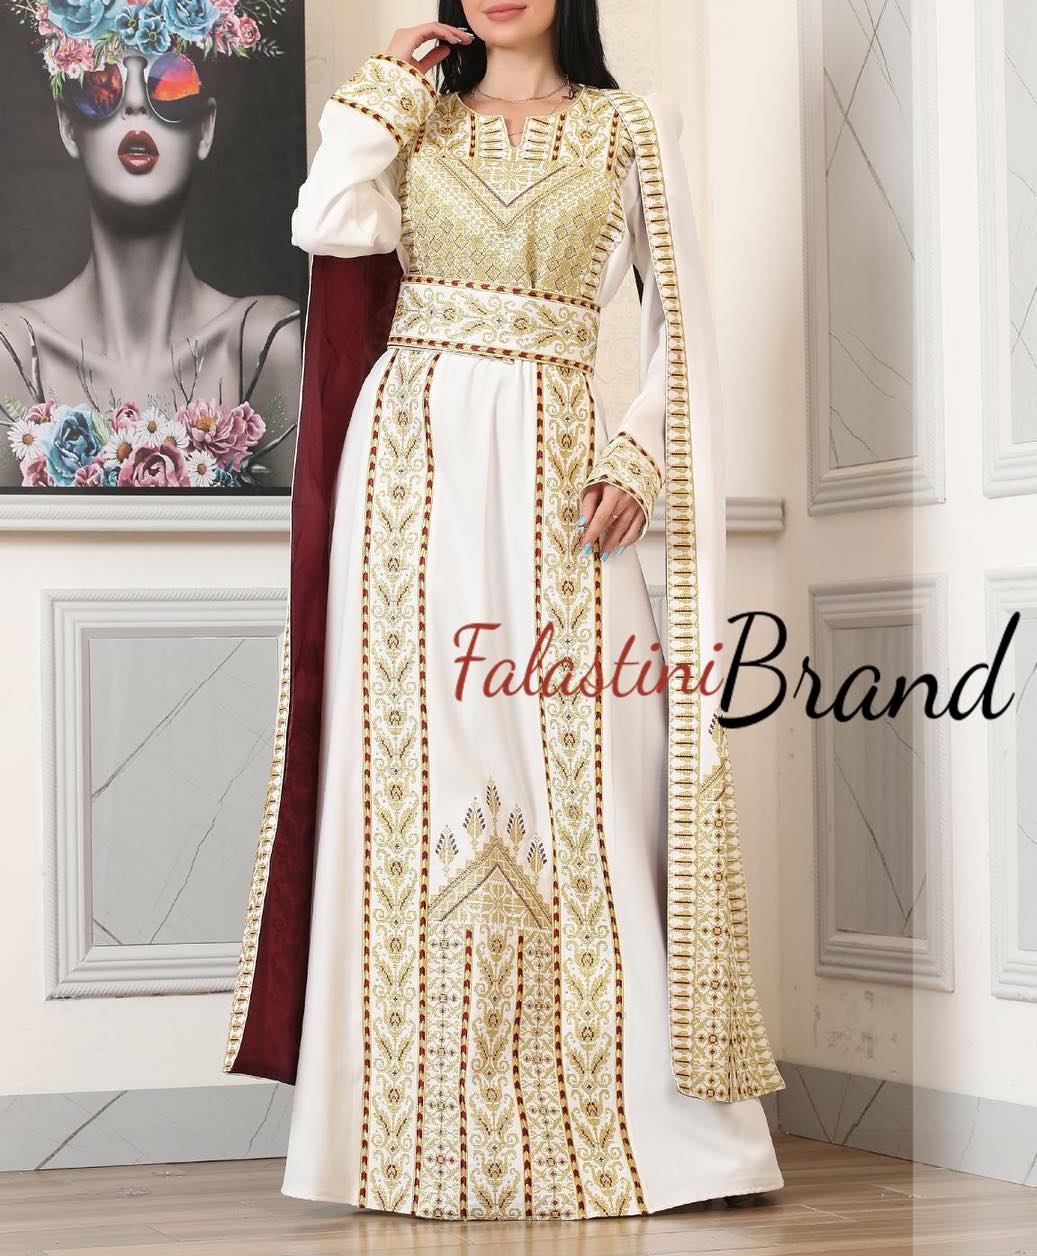 Stunning White And Gold Royal Sleeve Palestinian Embroidered Dress